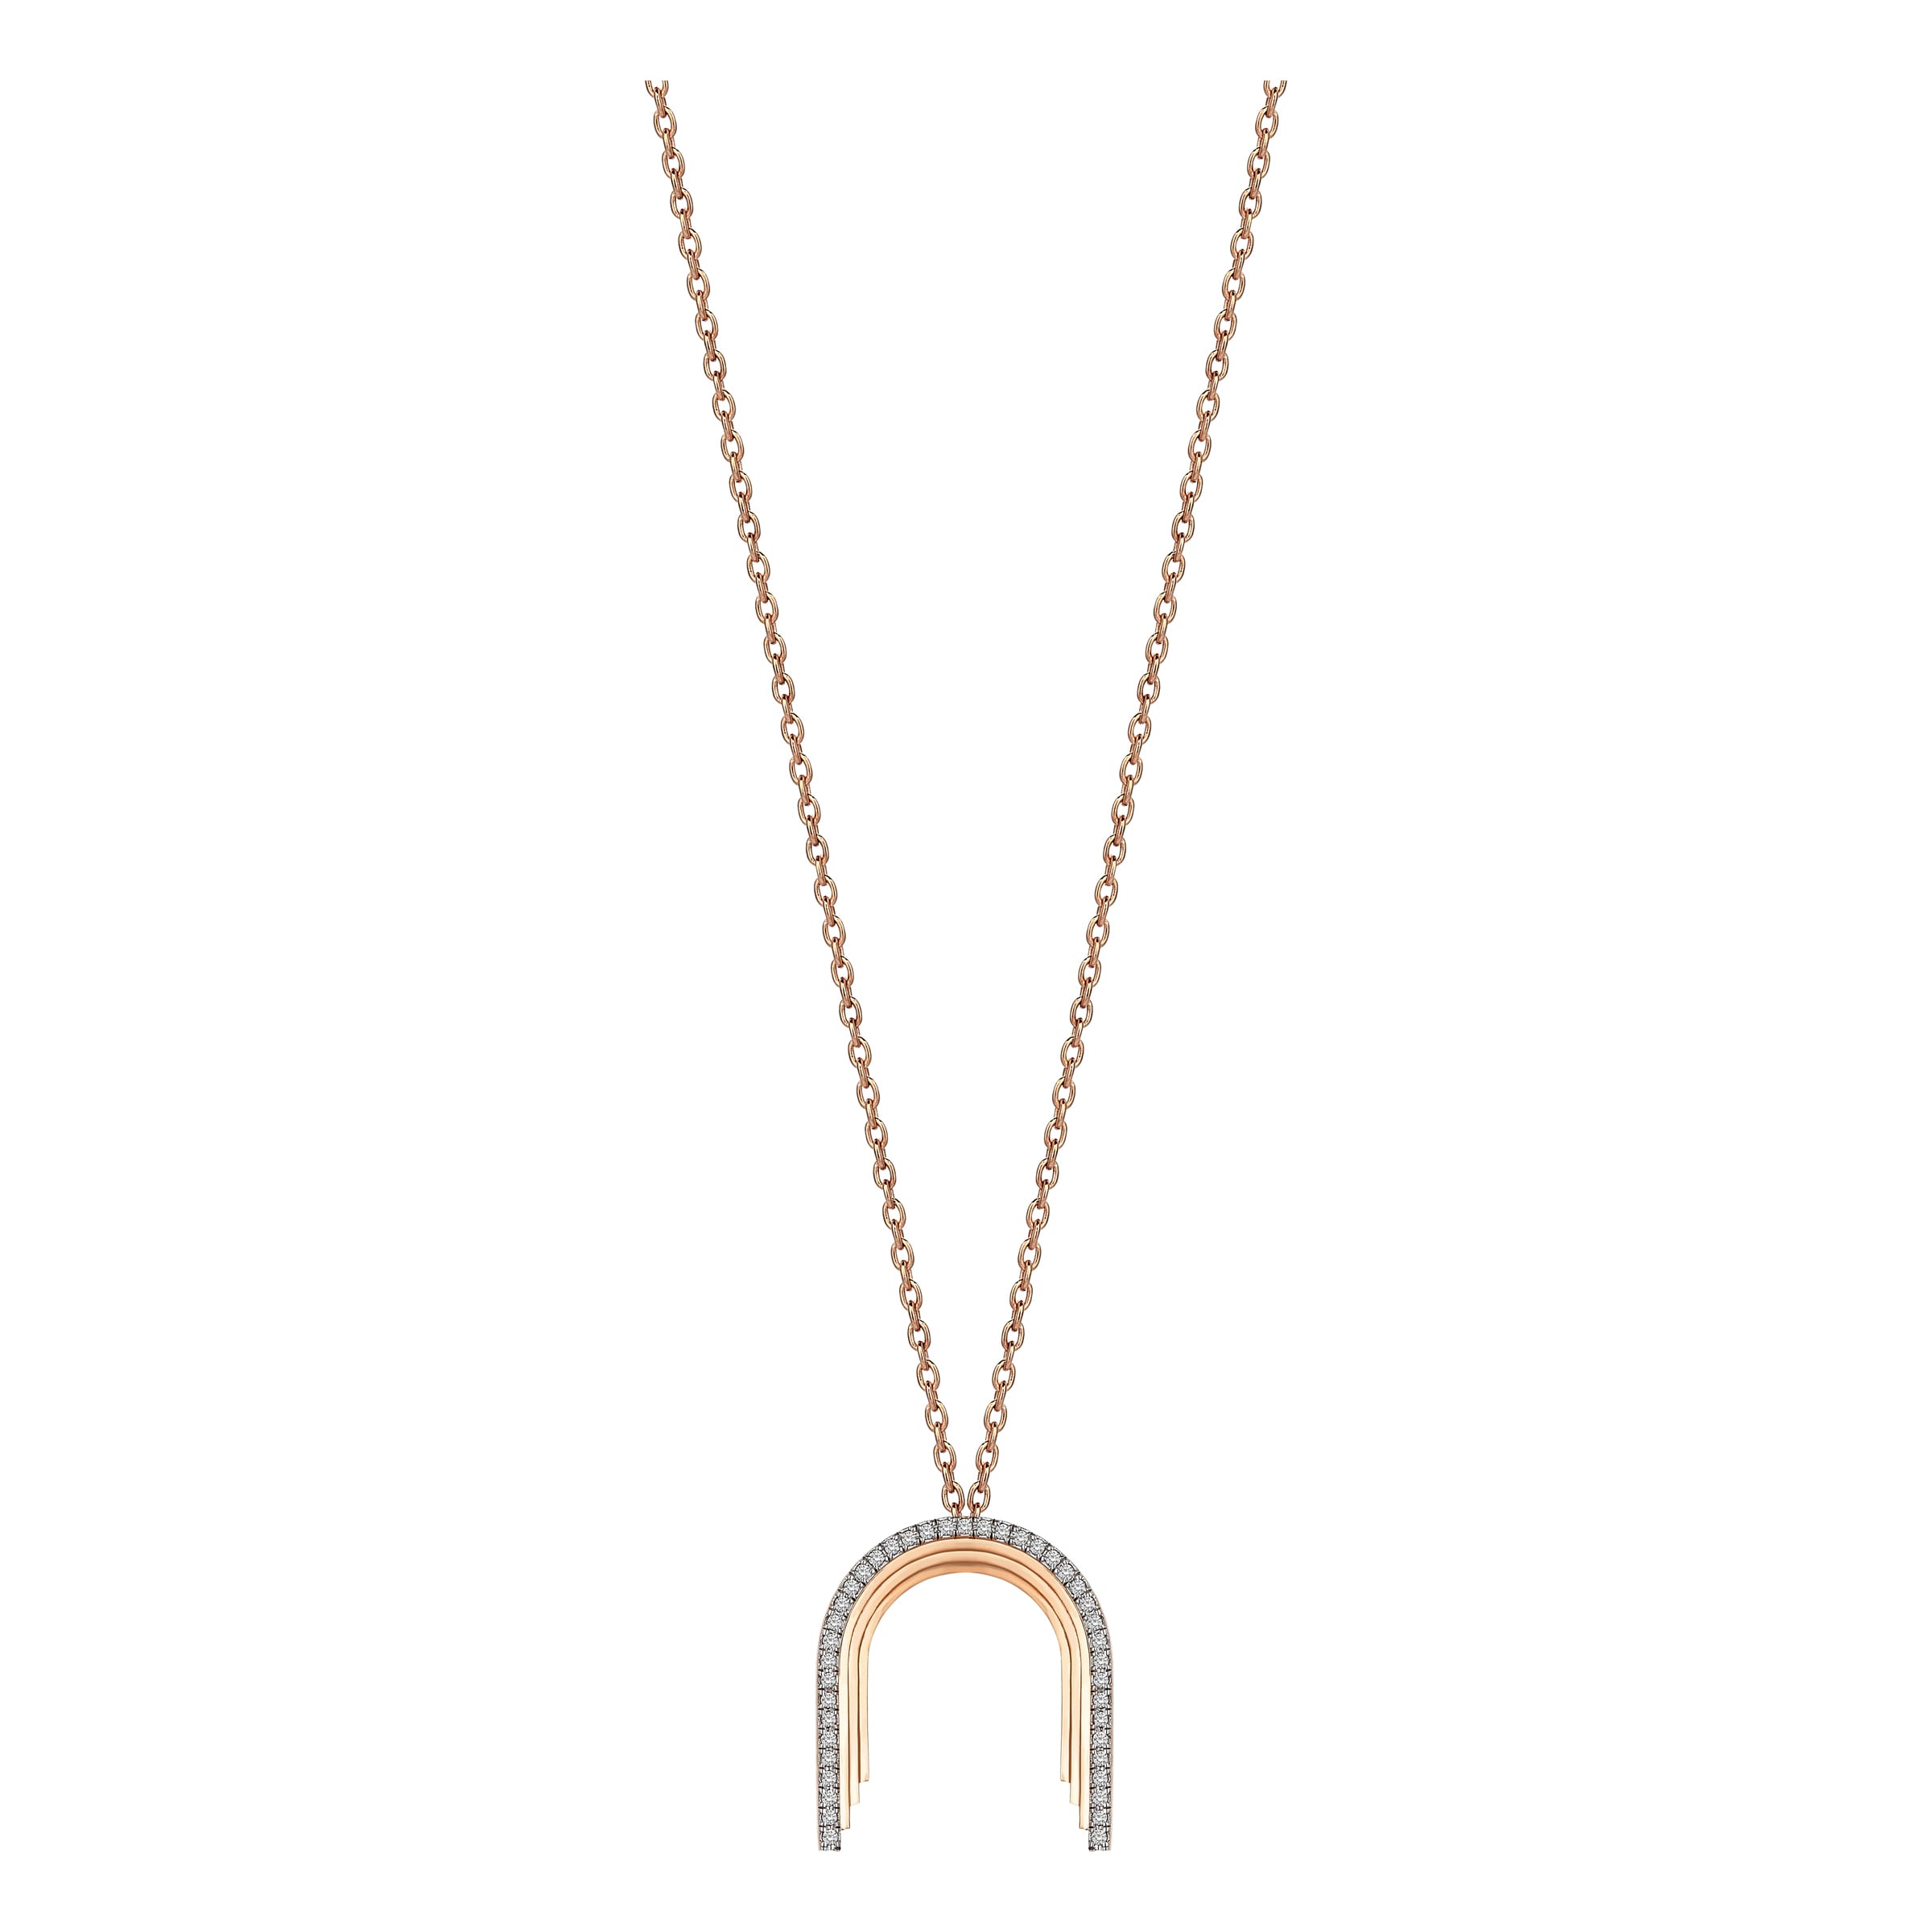 Convex Mini Arch Necklace in Yellow Gold - Her Story Shop